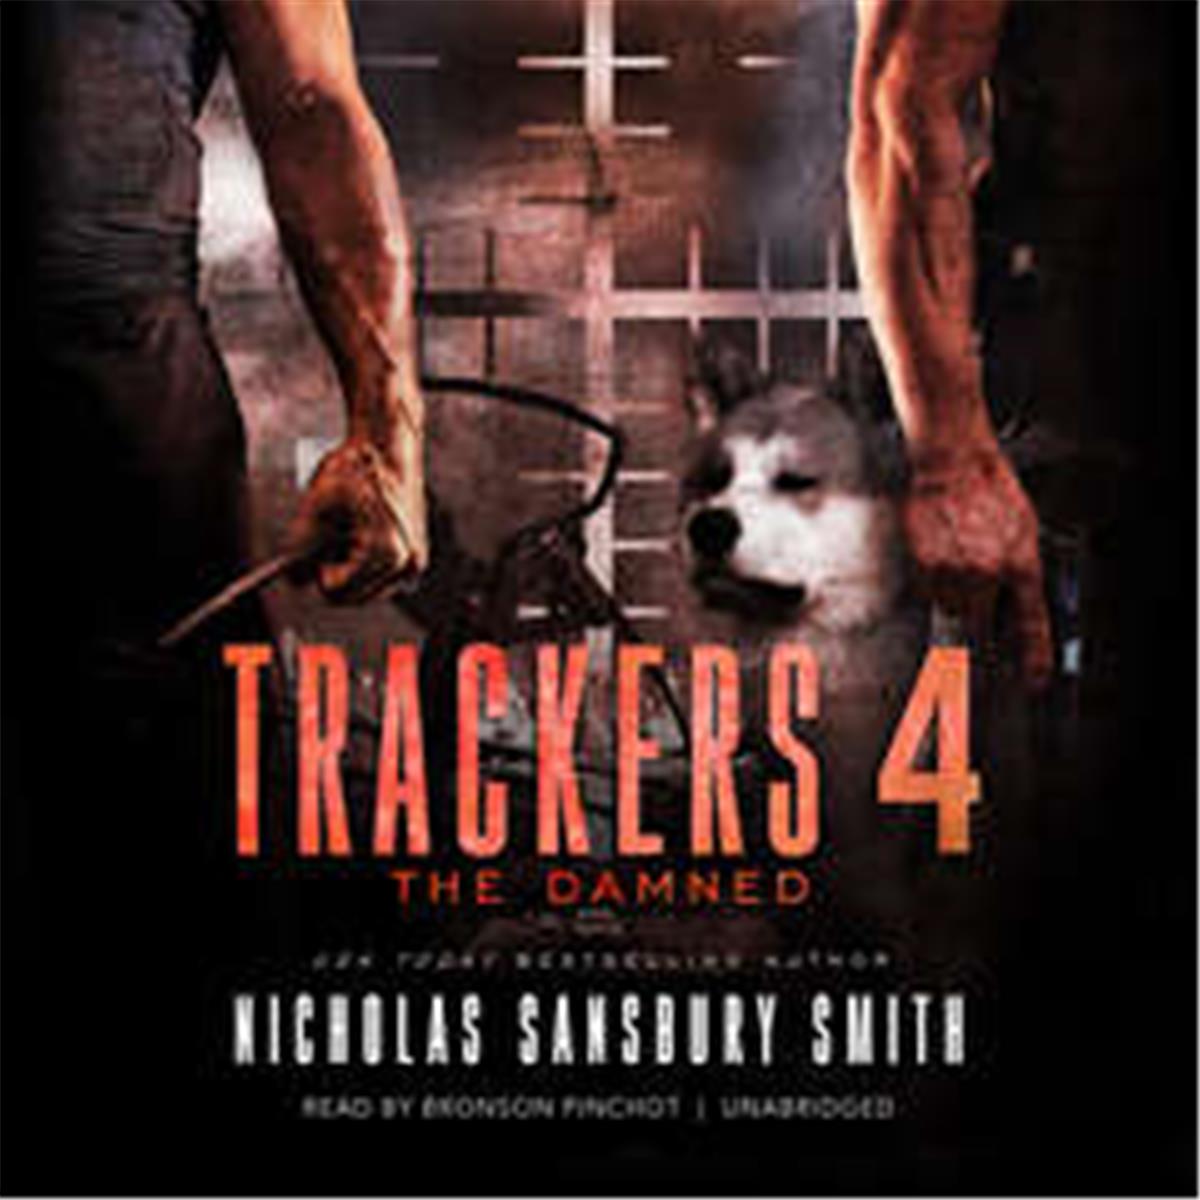 ISBN 9781538492239 product image for 9781538492239 Trackers 4 the Damned Audio Book | upcitemdb.com